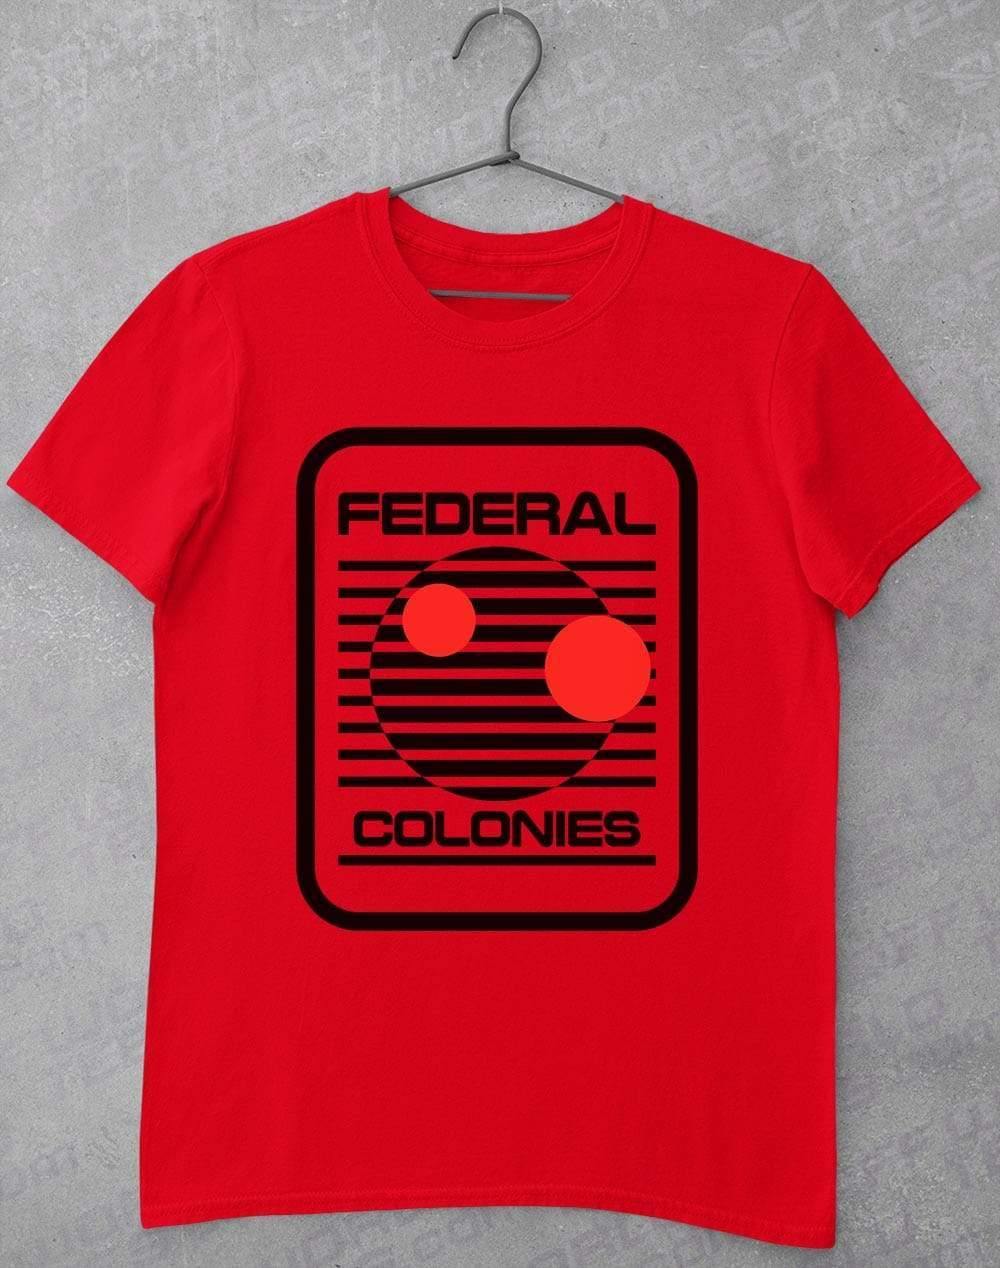 Federal Colonies T-Shirt S / Red  - Off World Tees